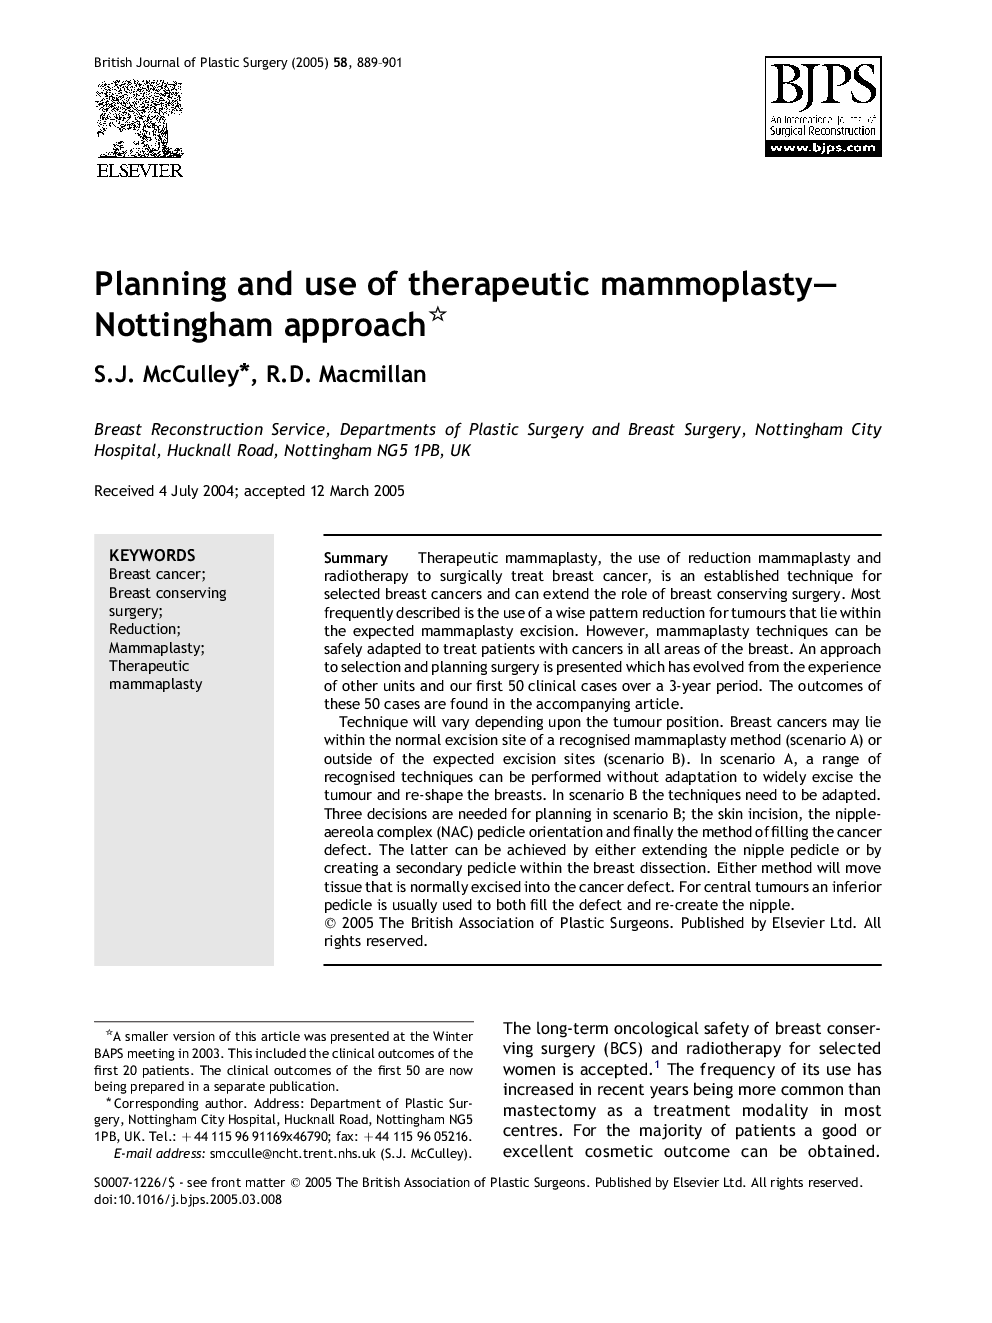 Planning and use of therapeutic mammoplasty-Nottingham approach